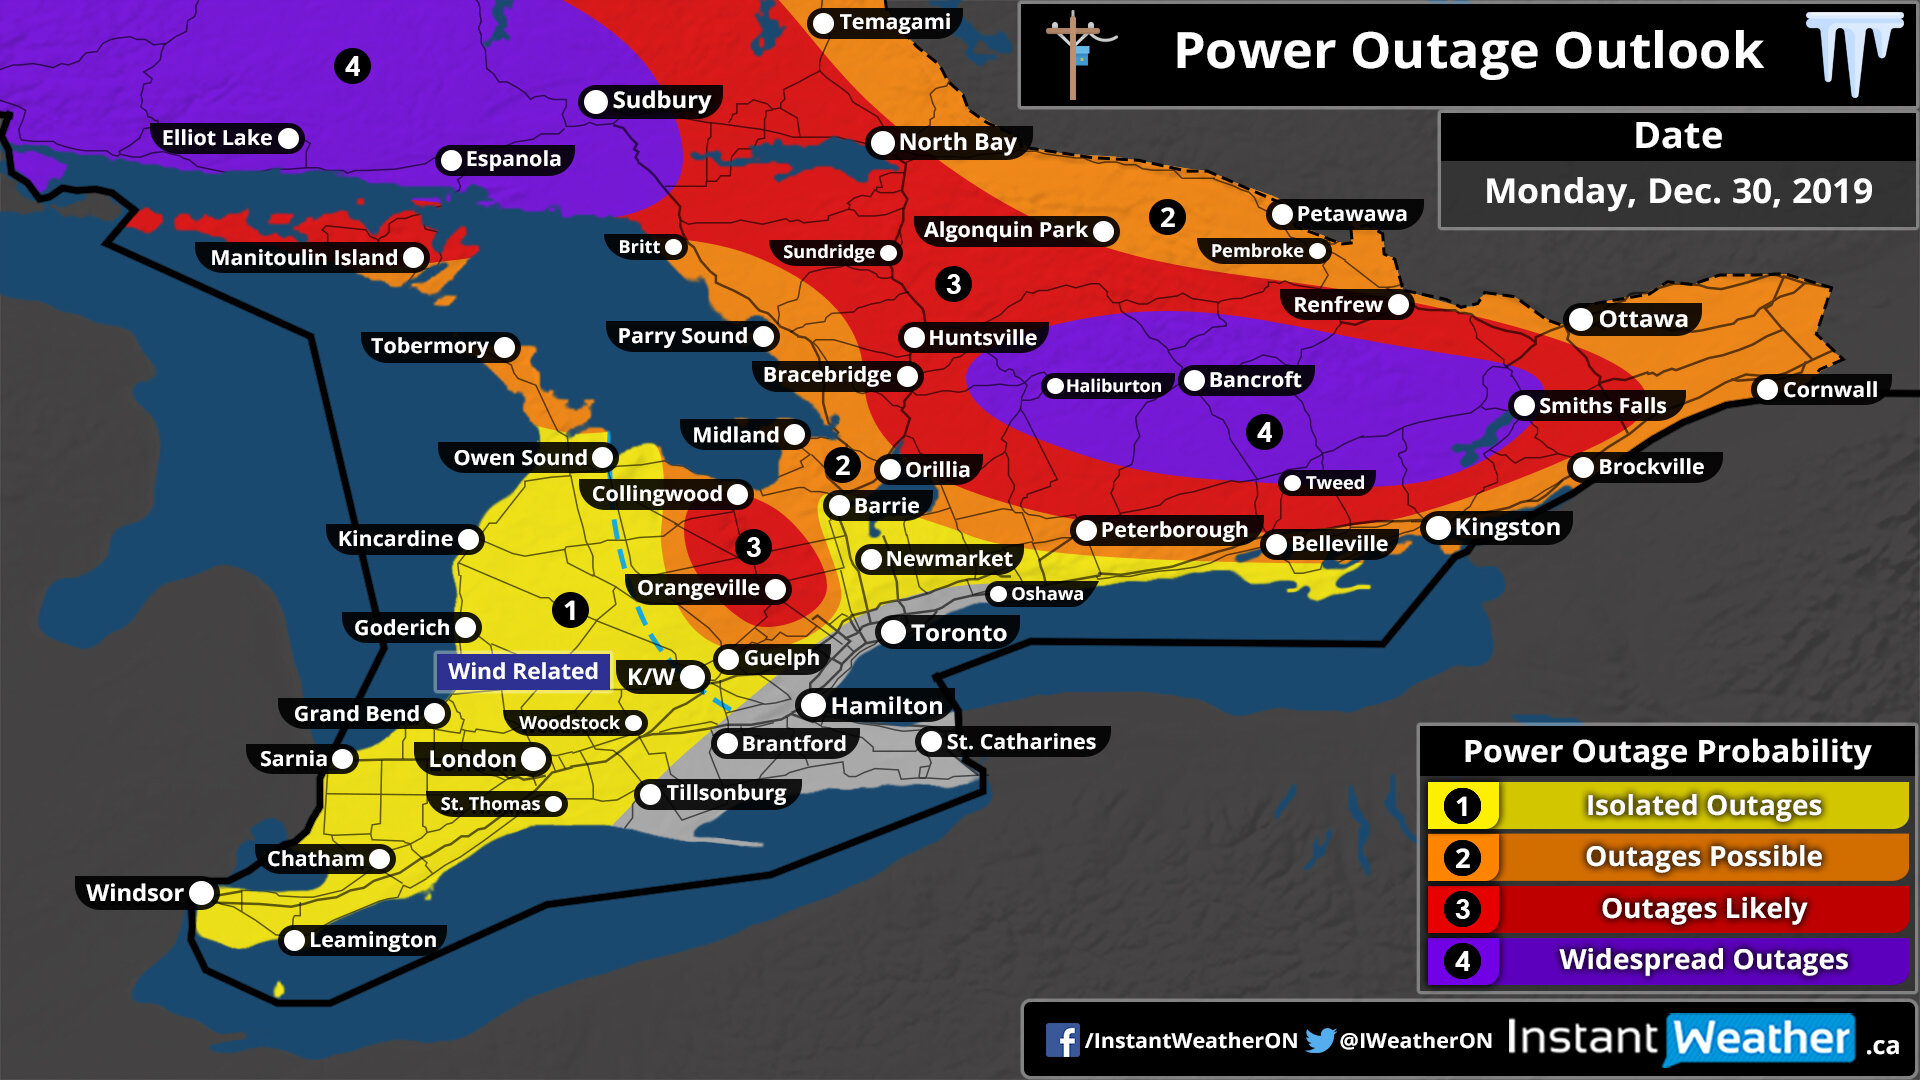 Power Outage Outlook for Monday, December 30, 2019 — Instant Weather